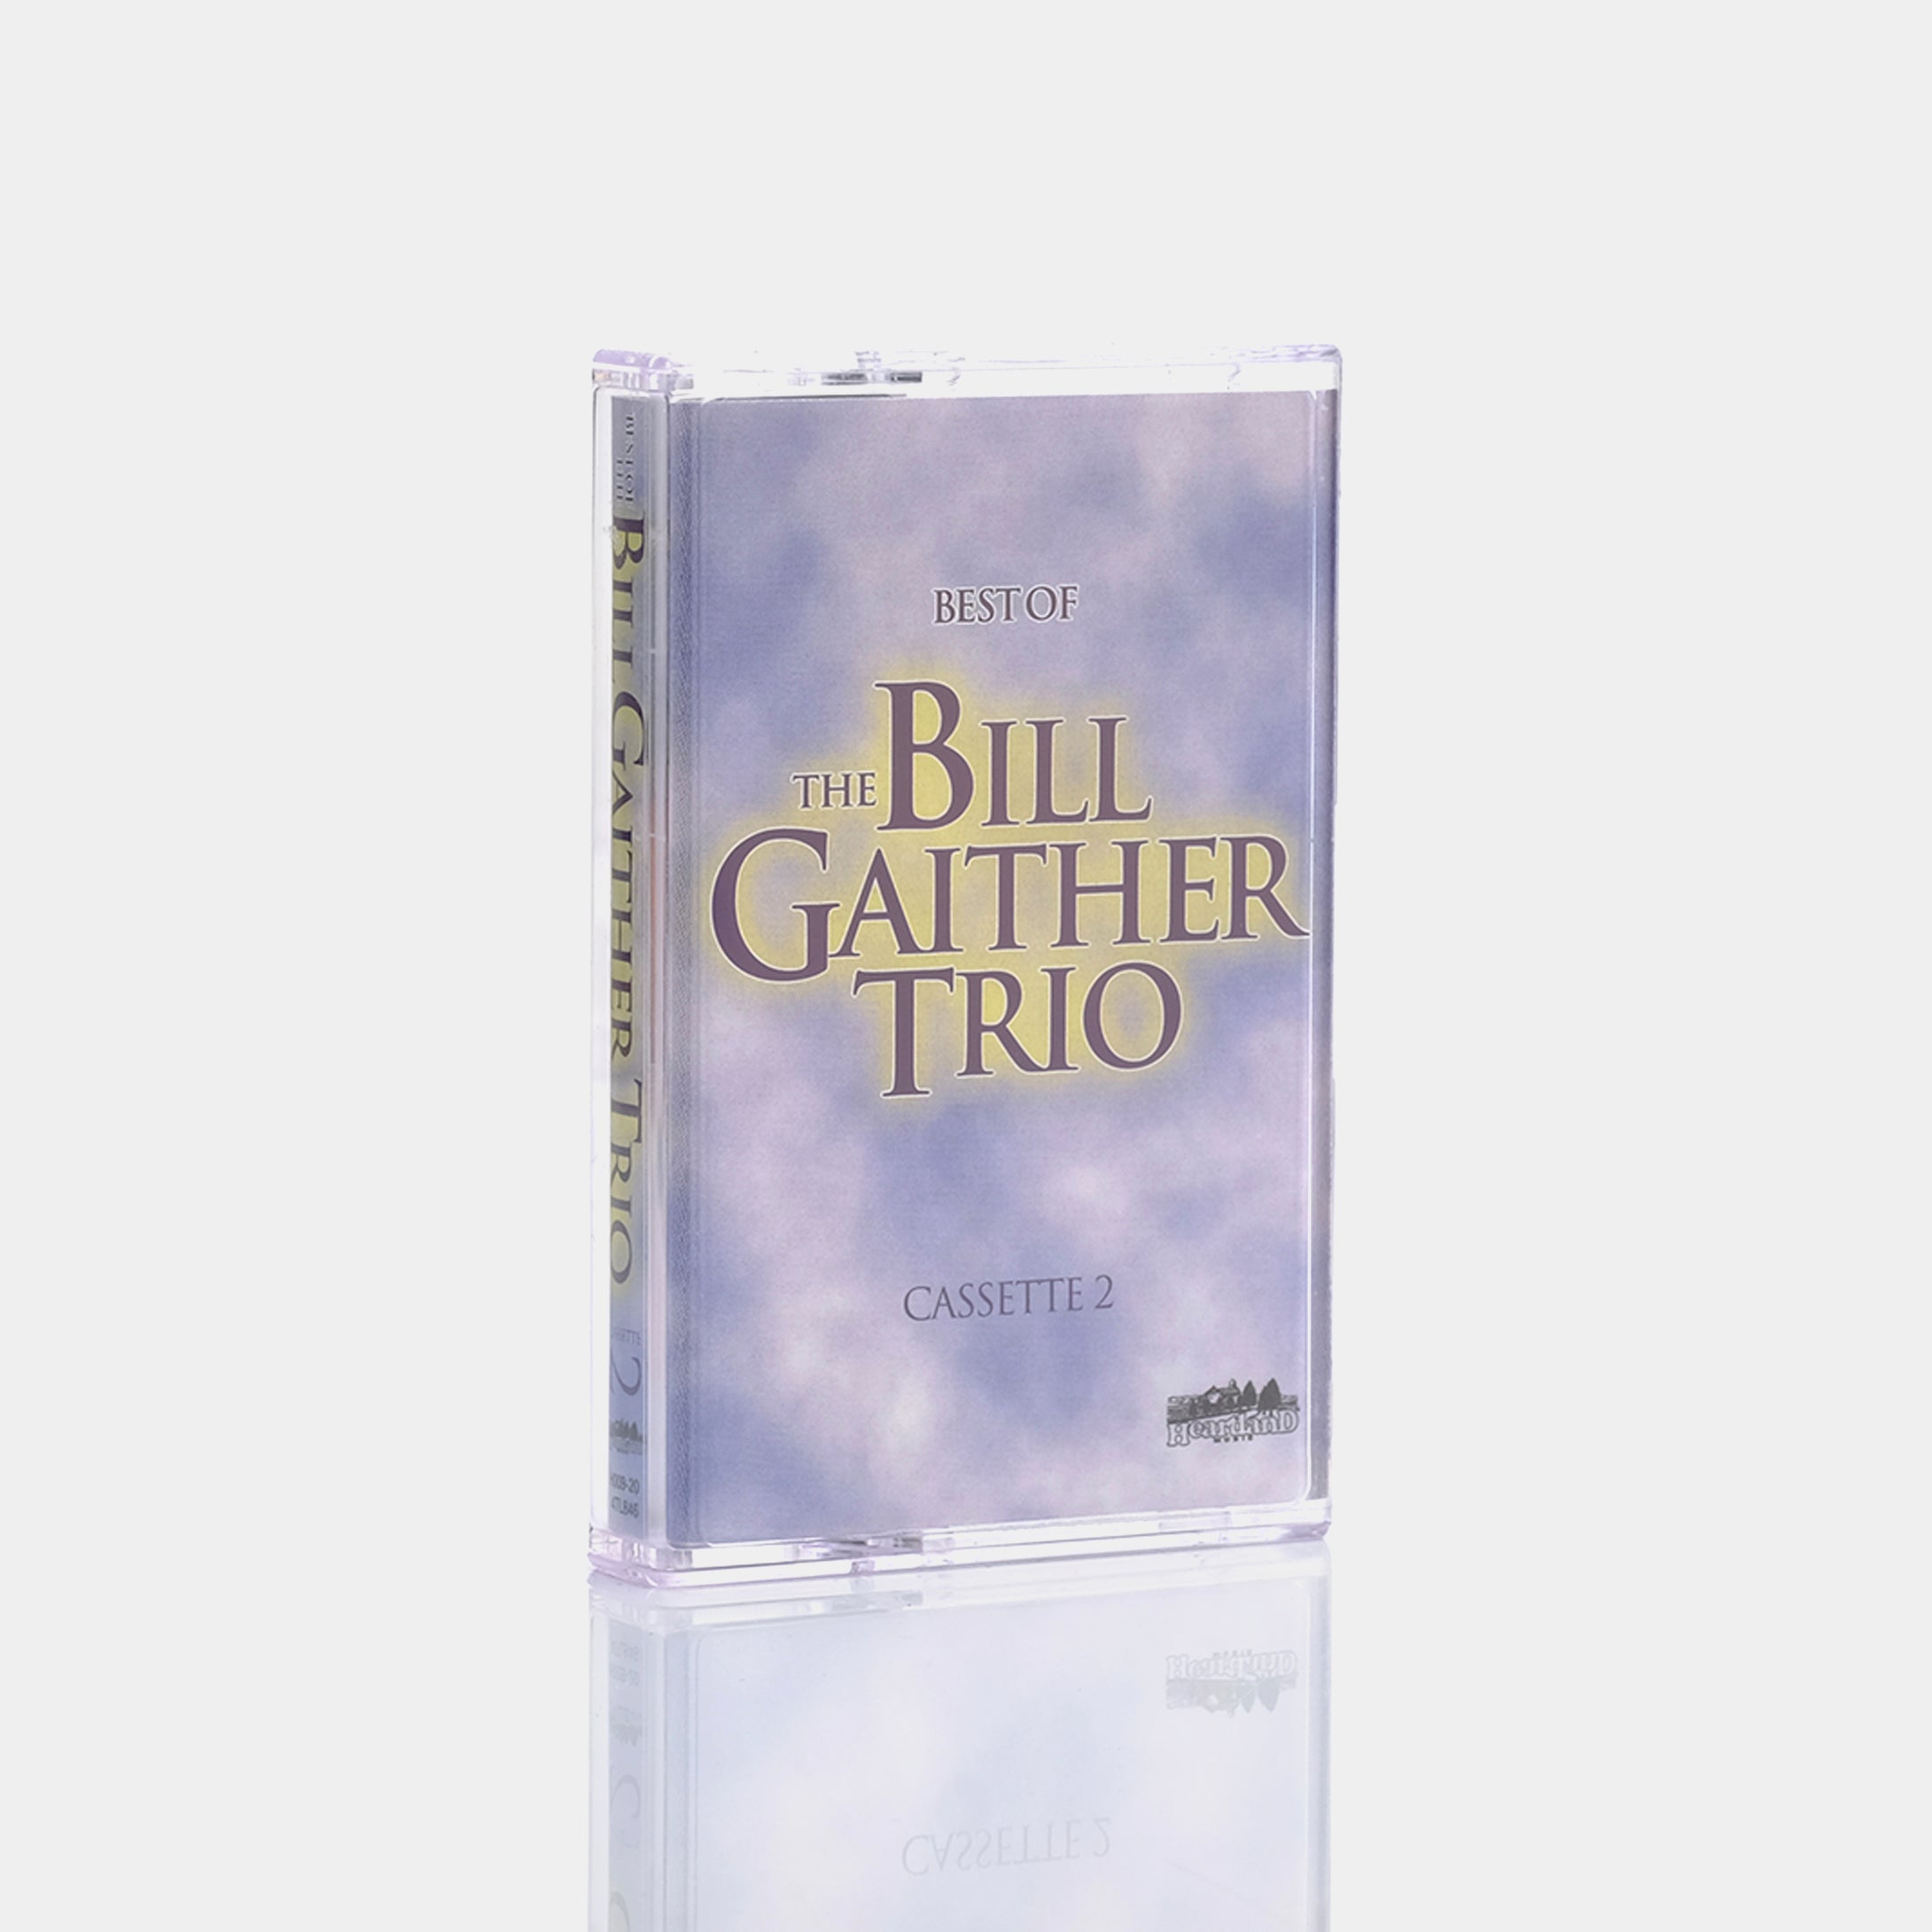 The Bill Gaither Trio - The Best of the Bill Gaither Trio (Tape 2) Cassette Tape